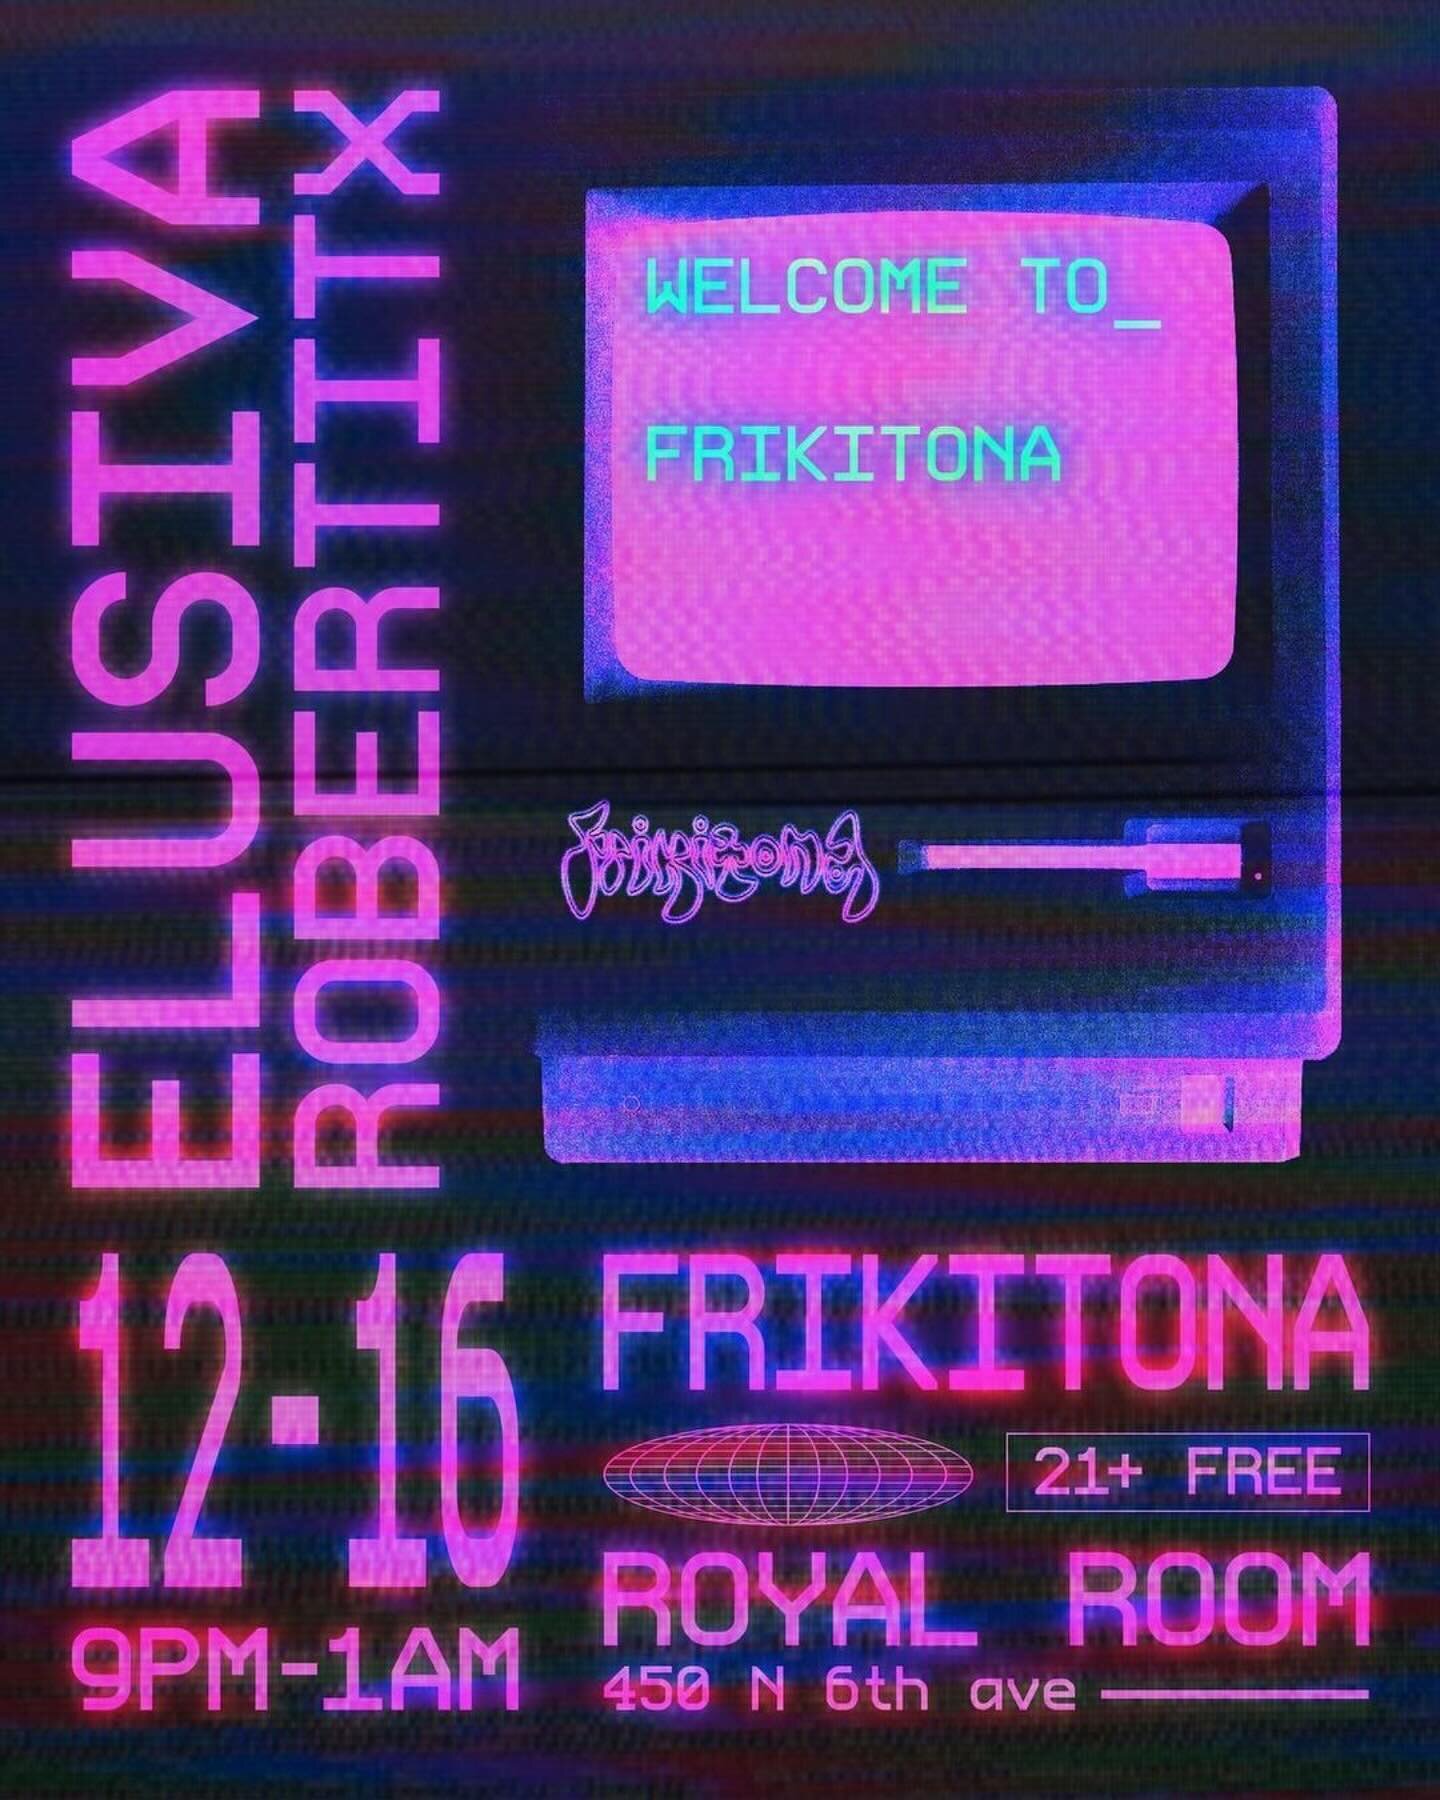 #Repost @frikitona.az
・・・
Are you ready to get FRIKI?😈
Join us for our second installment of FRIKITONA at @theroyalroomtucson 
12/16 9PM-1AM
21+